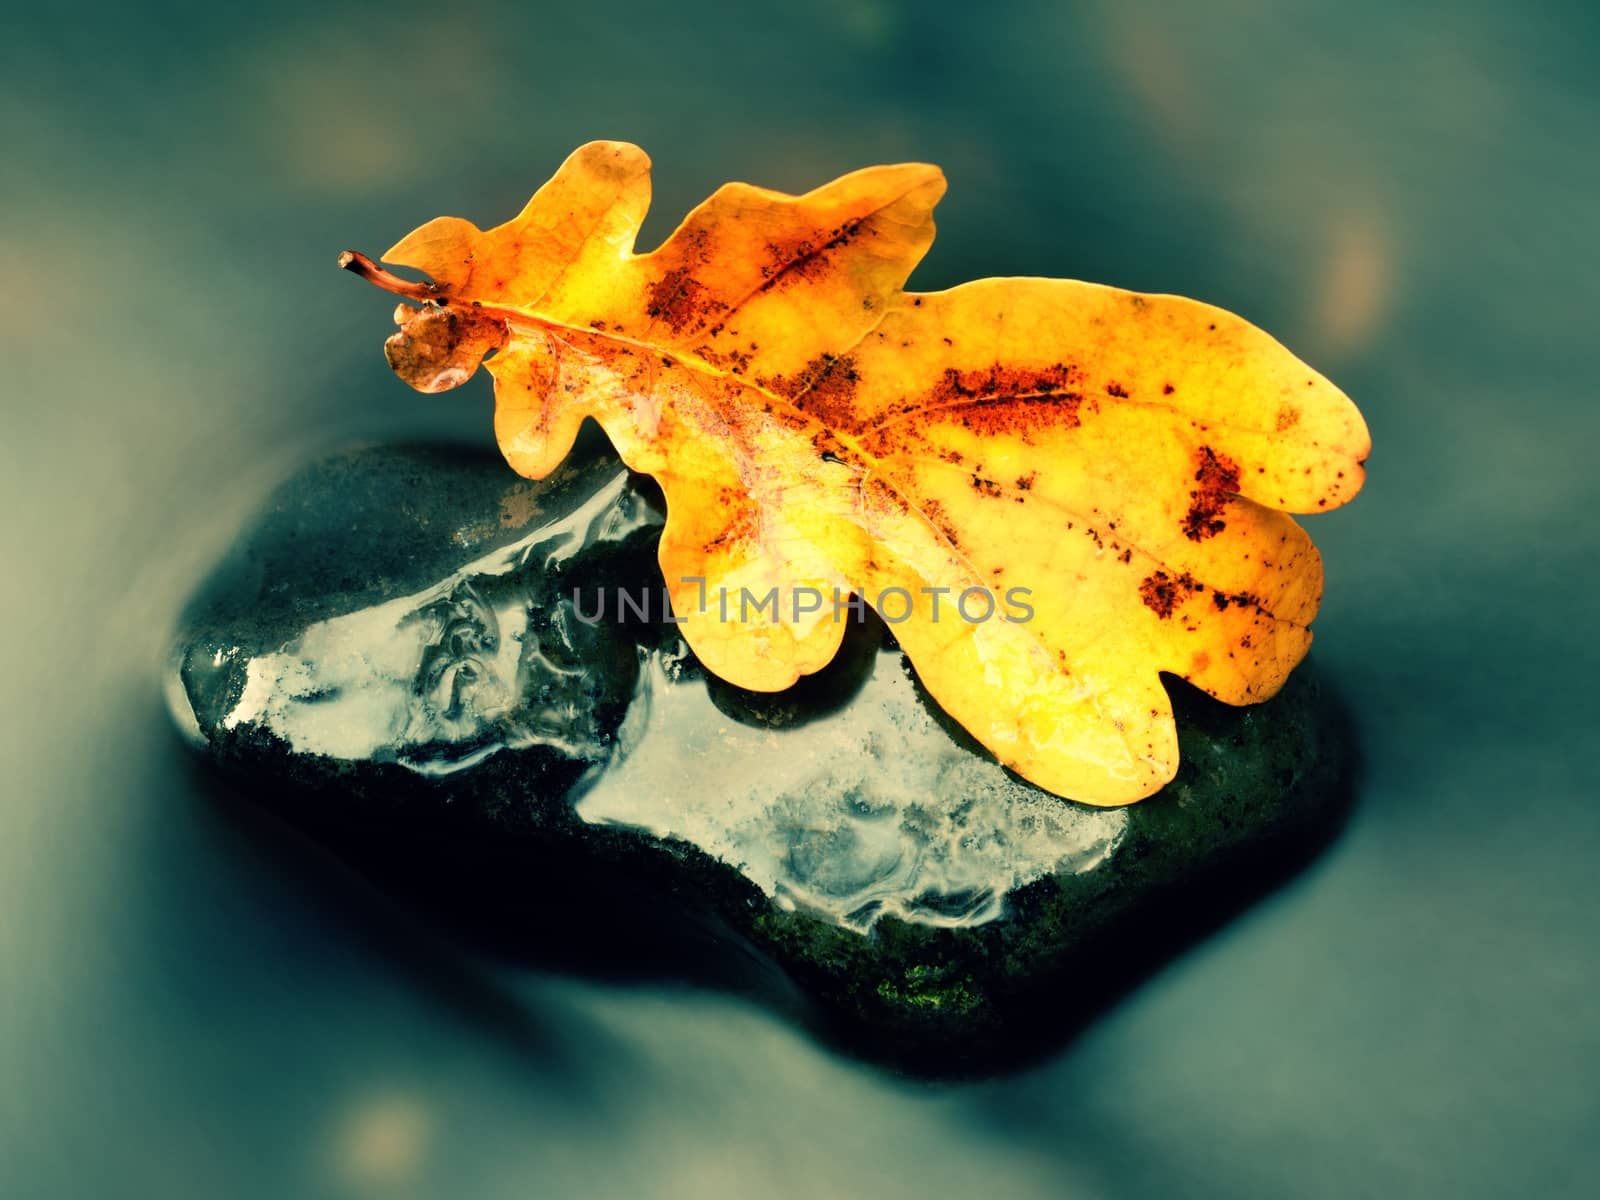 Detail of rotten old oak leaf on basalt stone in blurred water of mountain river, first autumn leaves.